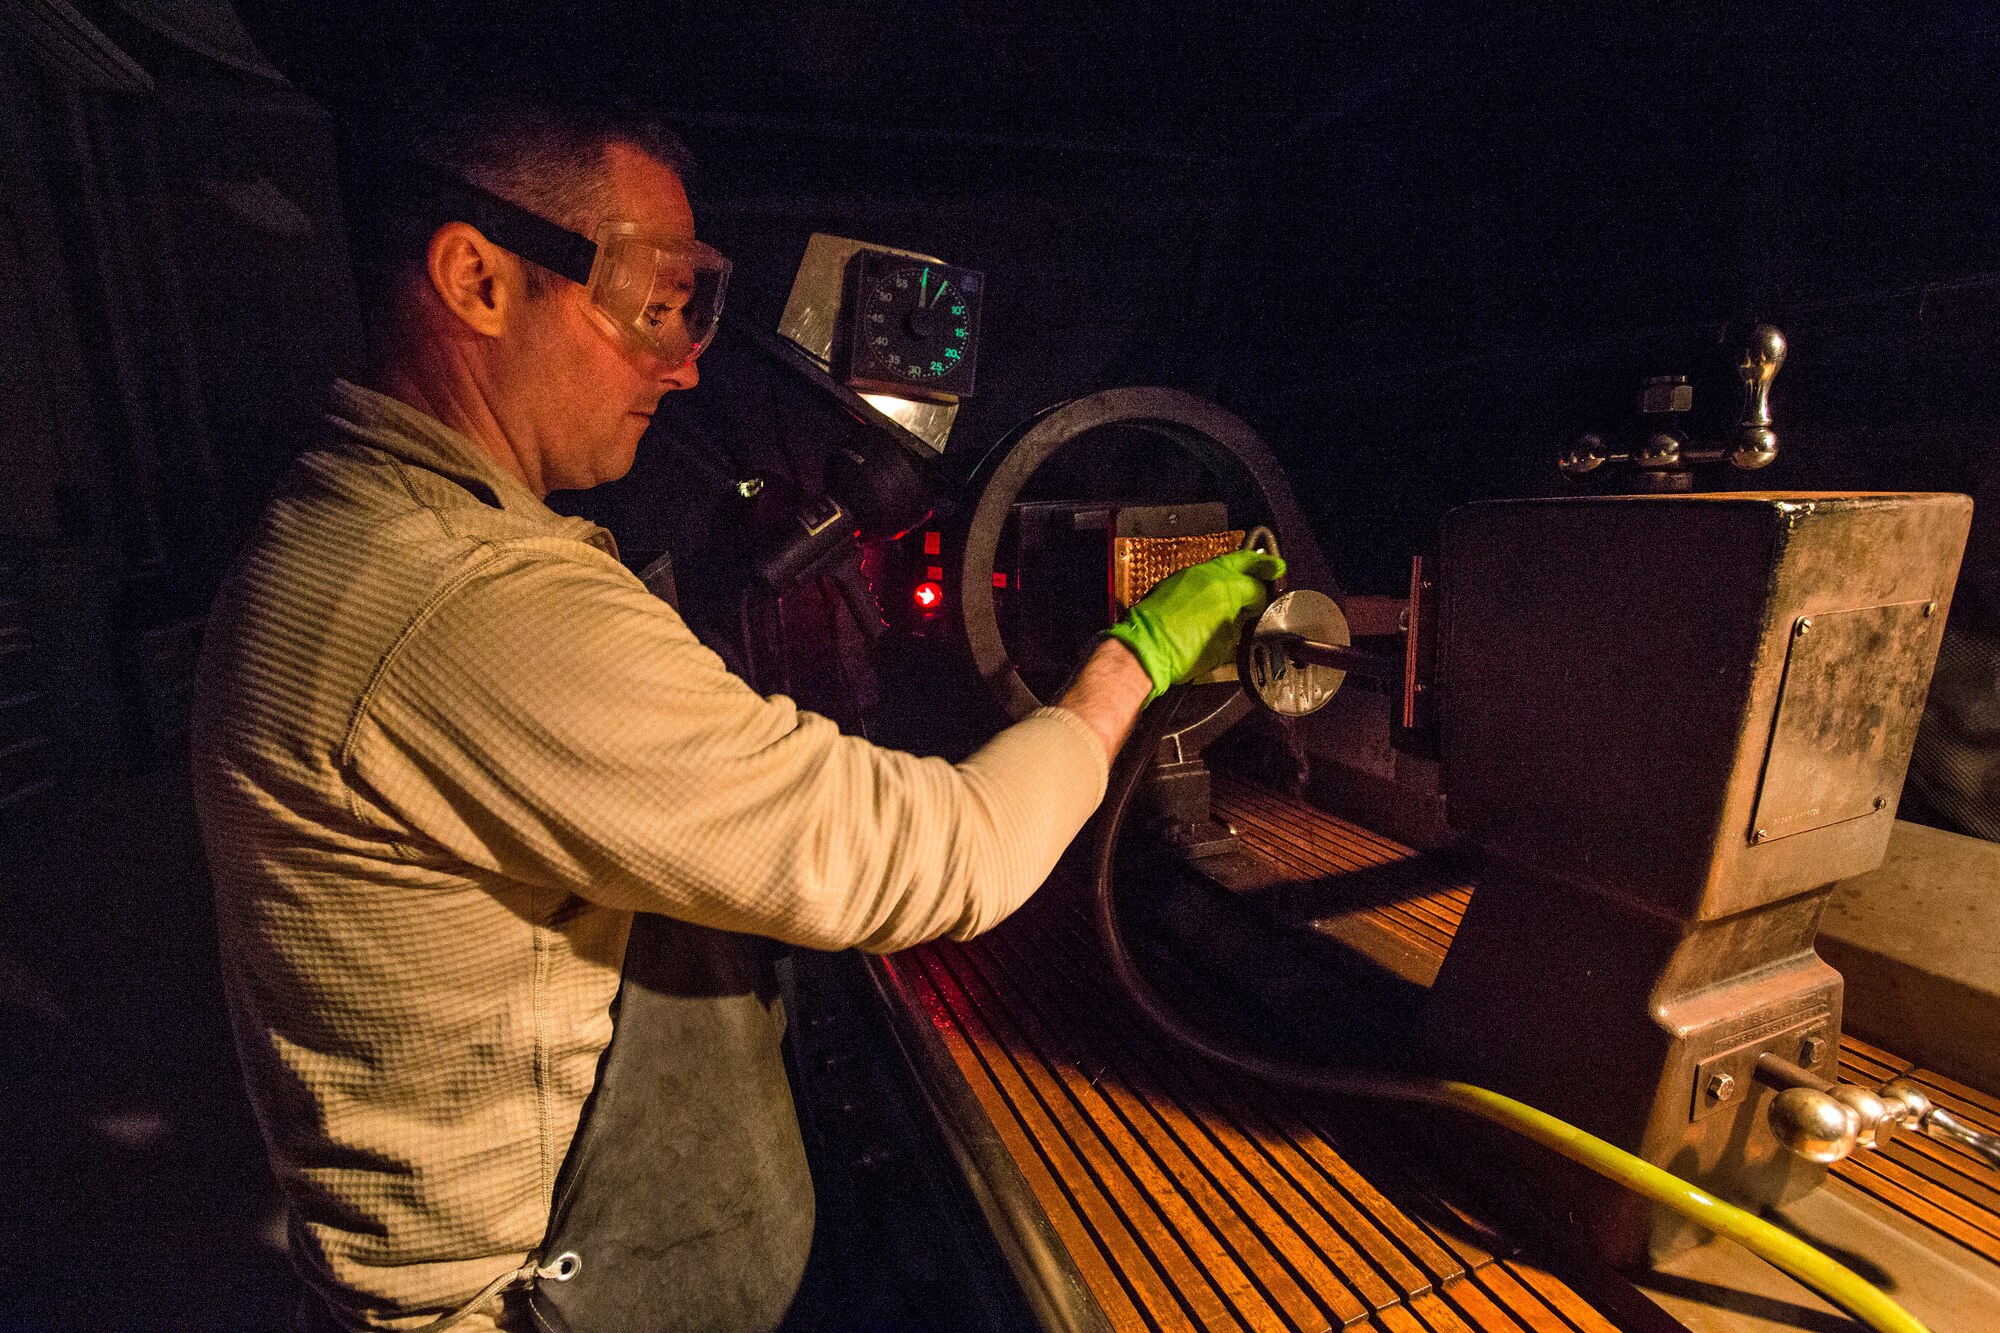 Senior Airman Lucas Derflinger, non-destructive inspection journeyman, 108th Wing, prepares to perform a process control using a ketos ring and a central bar conductor on the magnetic particle inspection unit at Joint Base McGuire-Dix-Lakehurst, N.J., March 7, 2015. The New Jersey Air National Guard NDI Airmen provide support to the structural maintenance program, which ensures that the KC-135R Stratotankers are mission-ready. (U.S. Air National Guard photo by Master Sgt. Mark C. Olsen/Released)